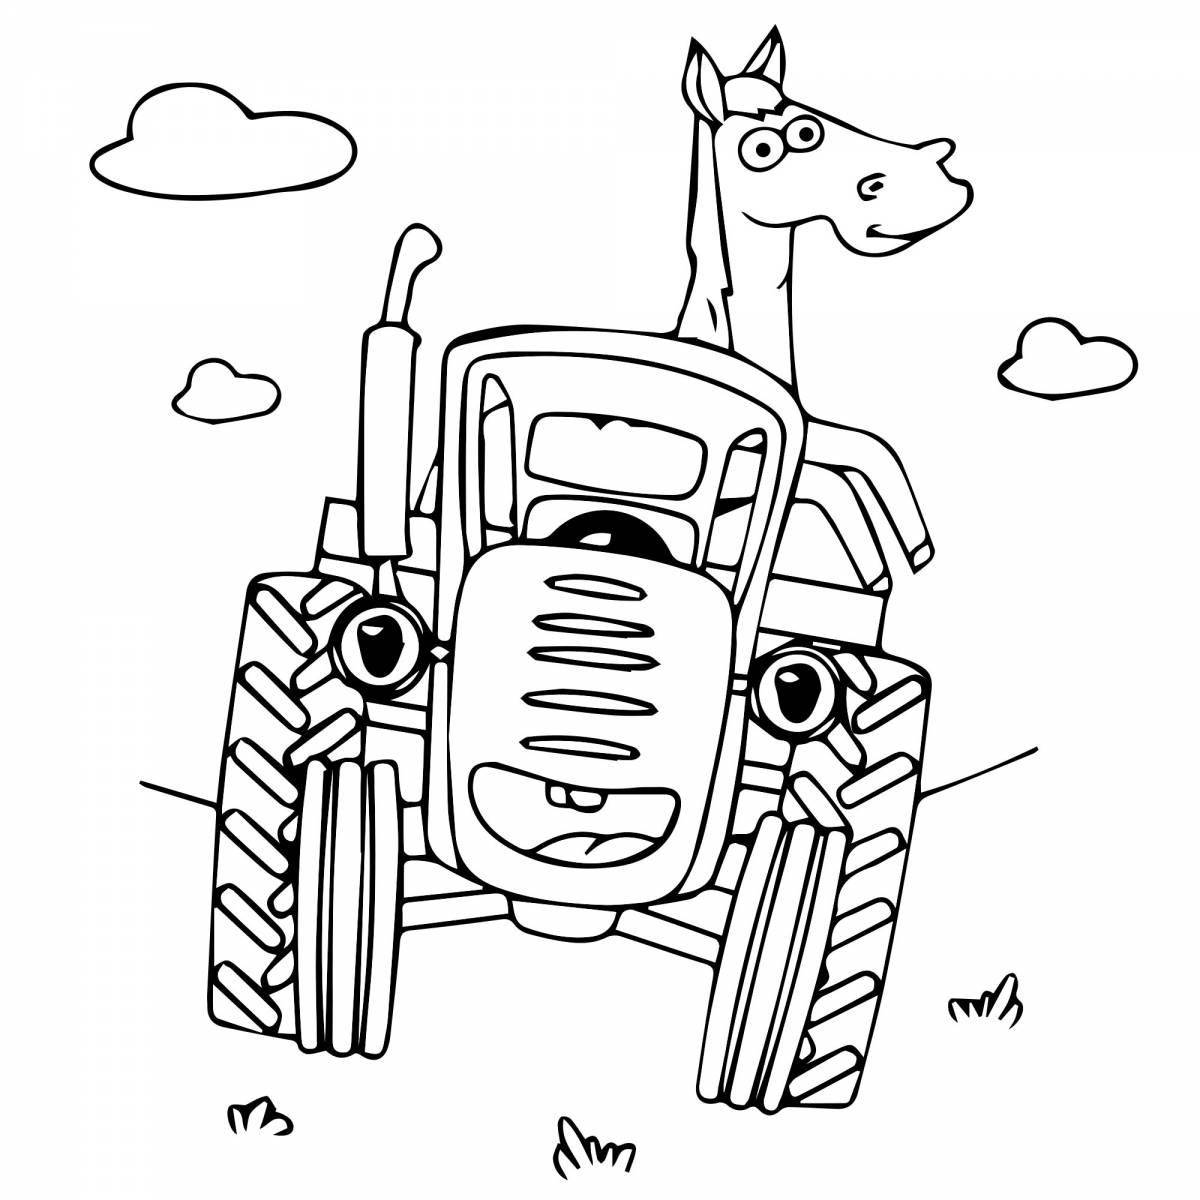 Adorable blue tractor seal coloring page